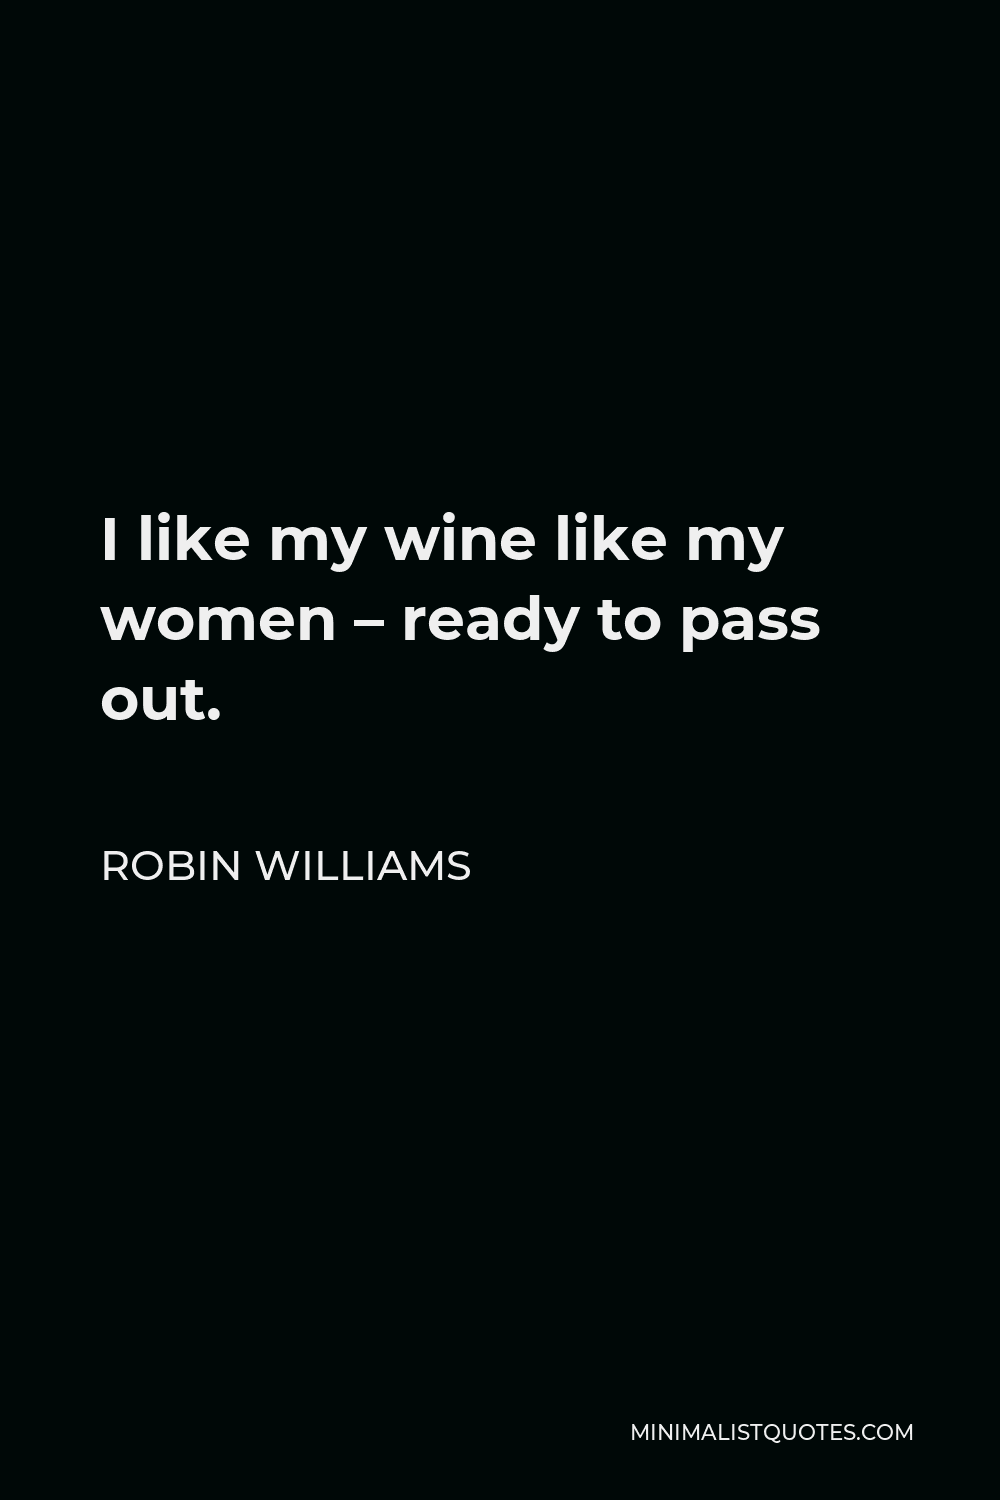 Robin Williams Quote - I like my wine like my women – ready to pass out.